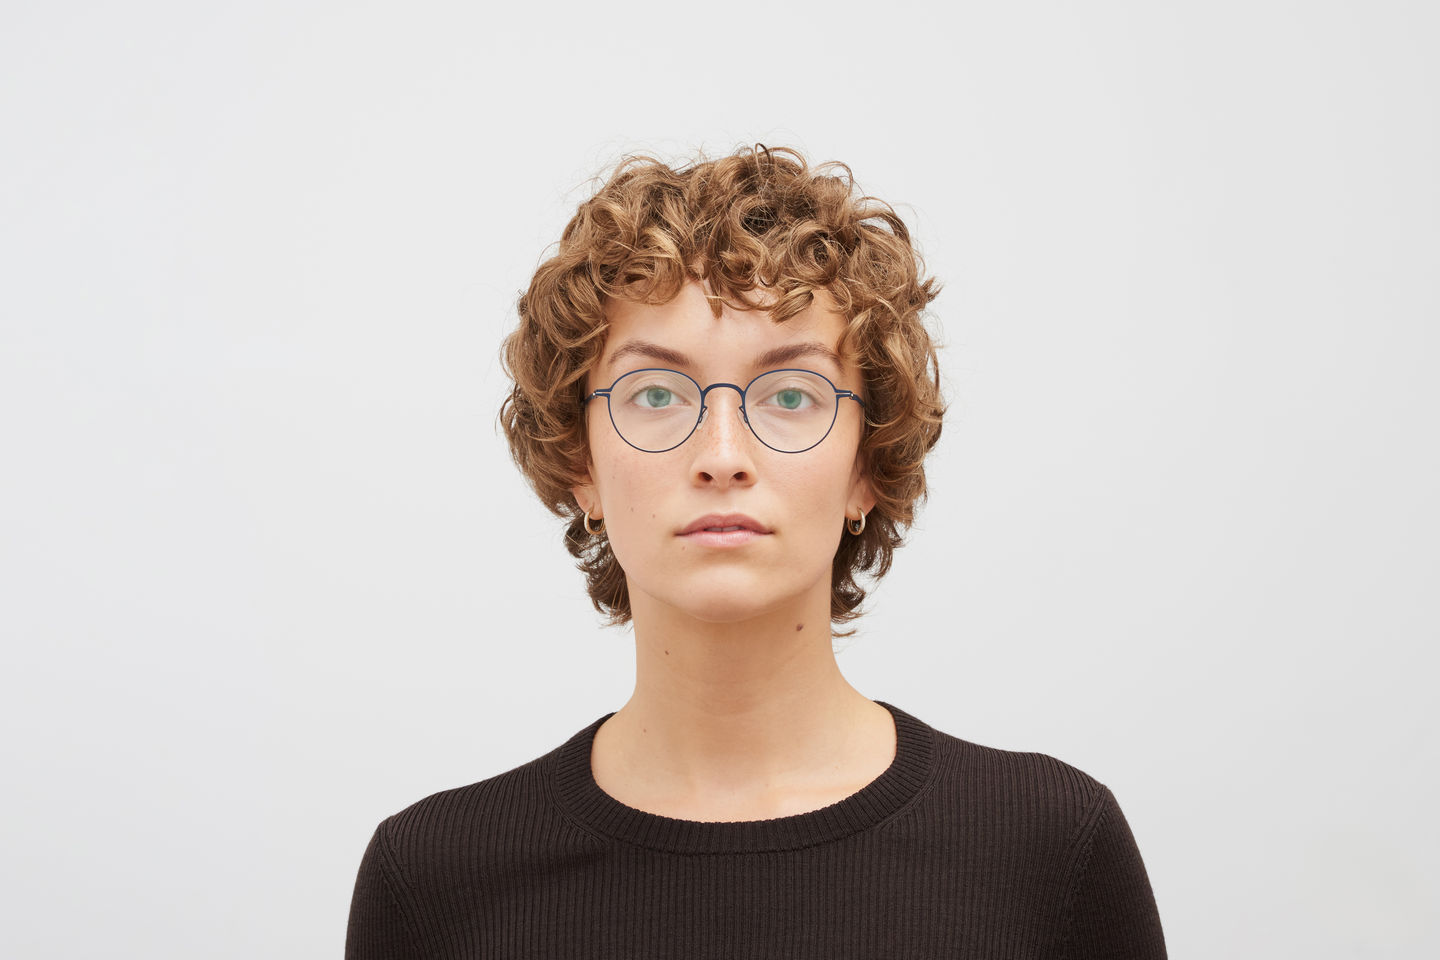 MYKITA - WHAT IS THE RIGHT FRAME FOR ME?